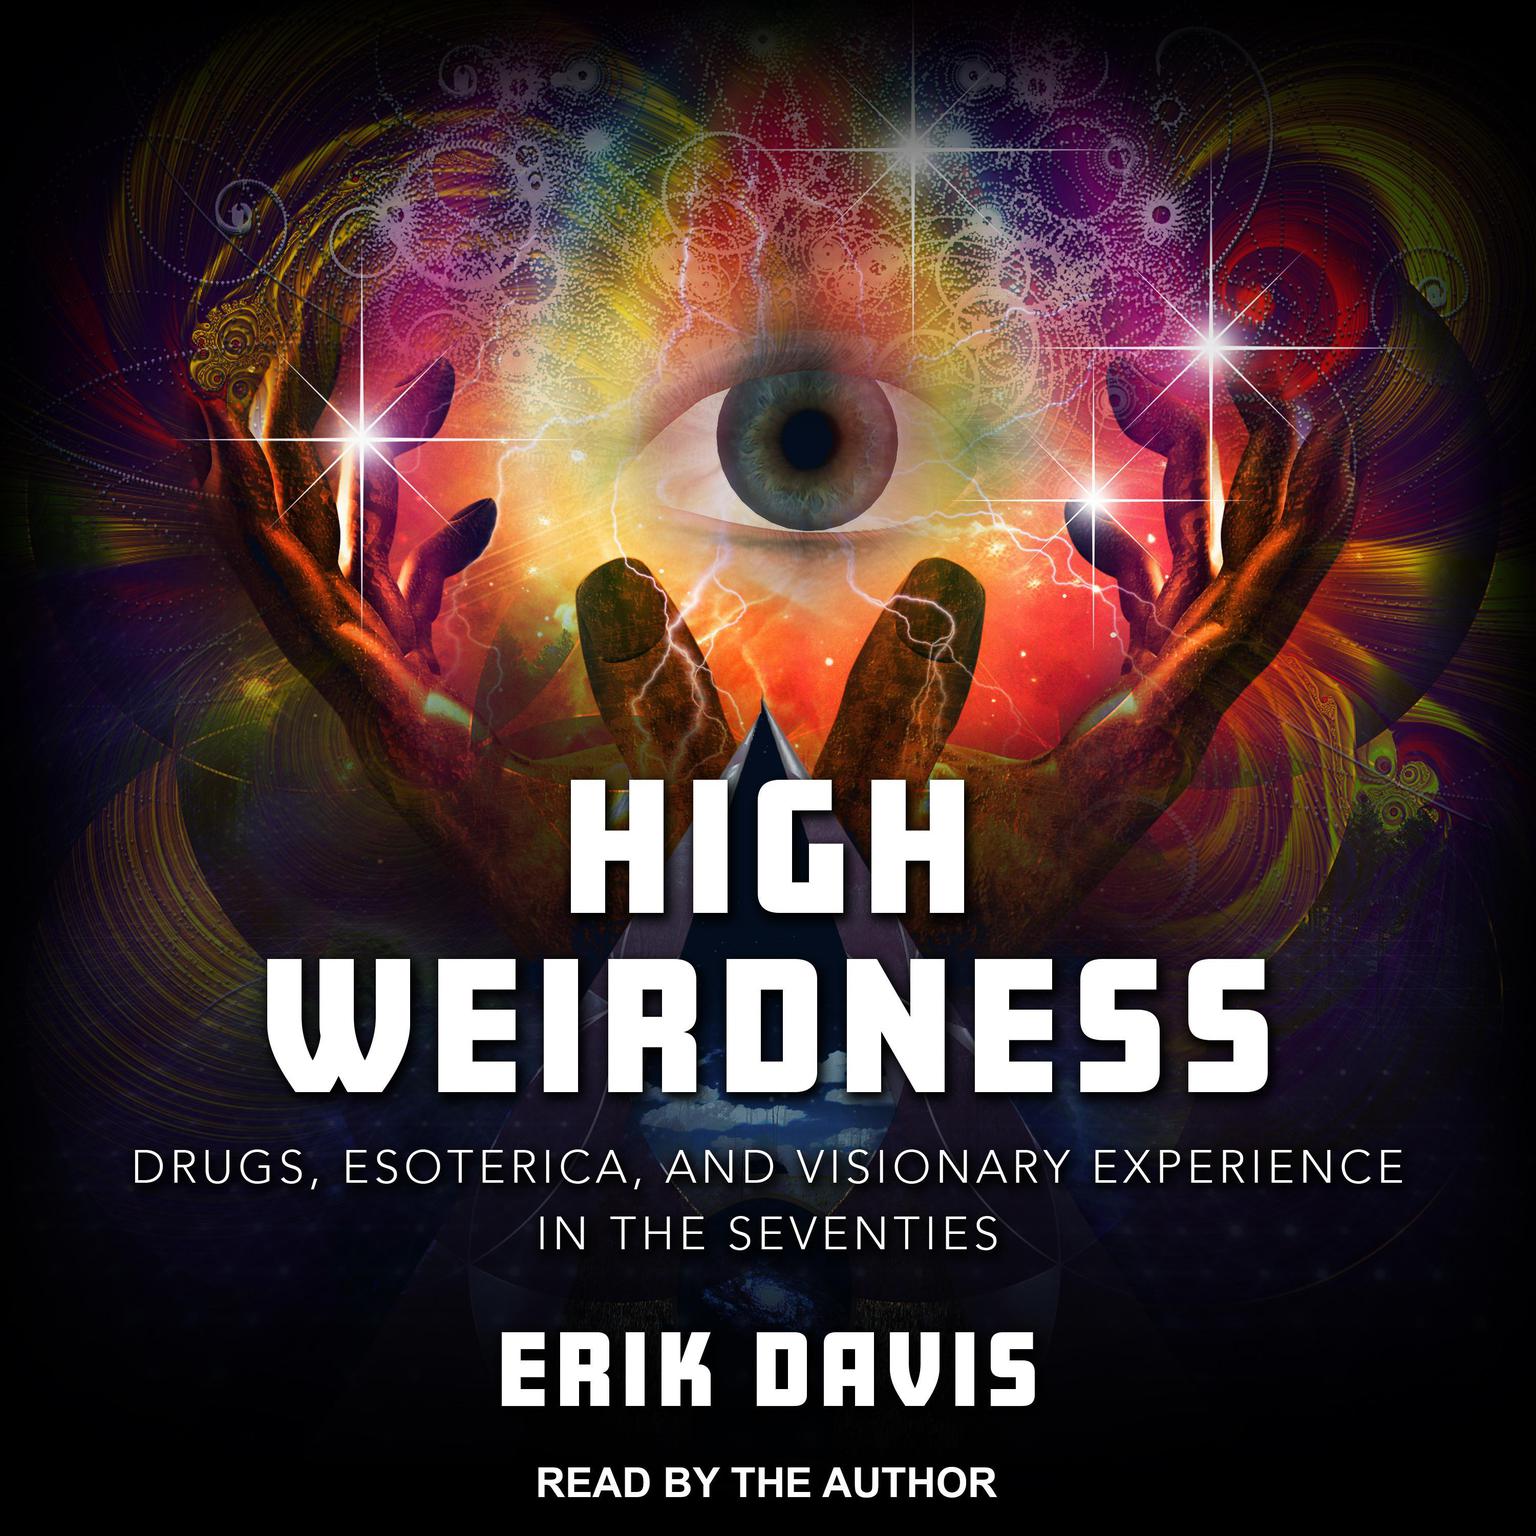 High Weirdness: Drugs, Esoterica, and Visionary Experience in the Seventies Audiobook, by Erik Davis